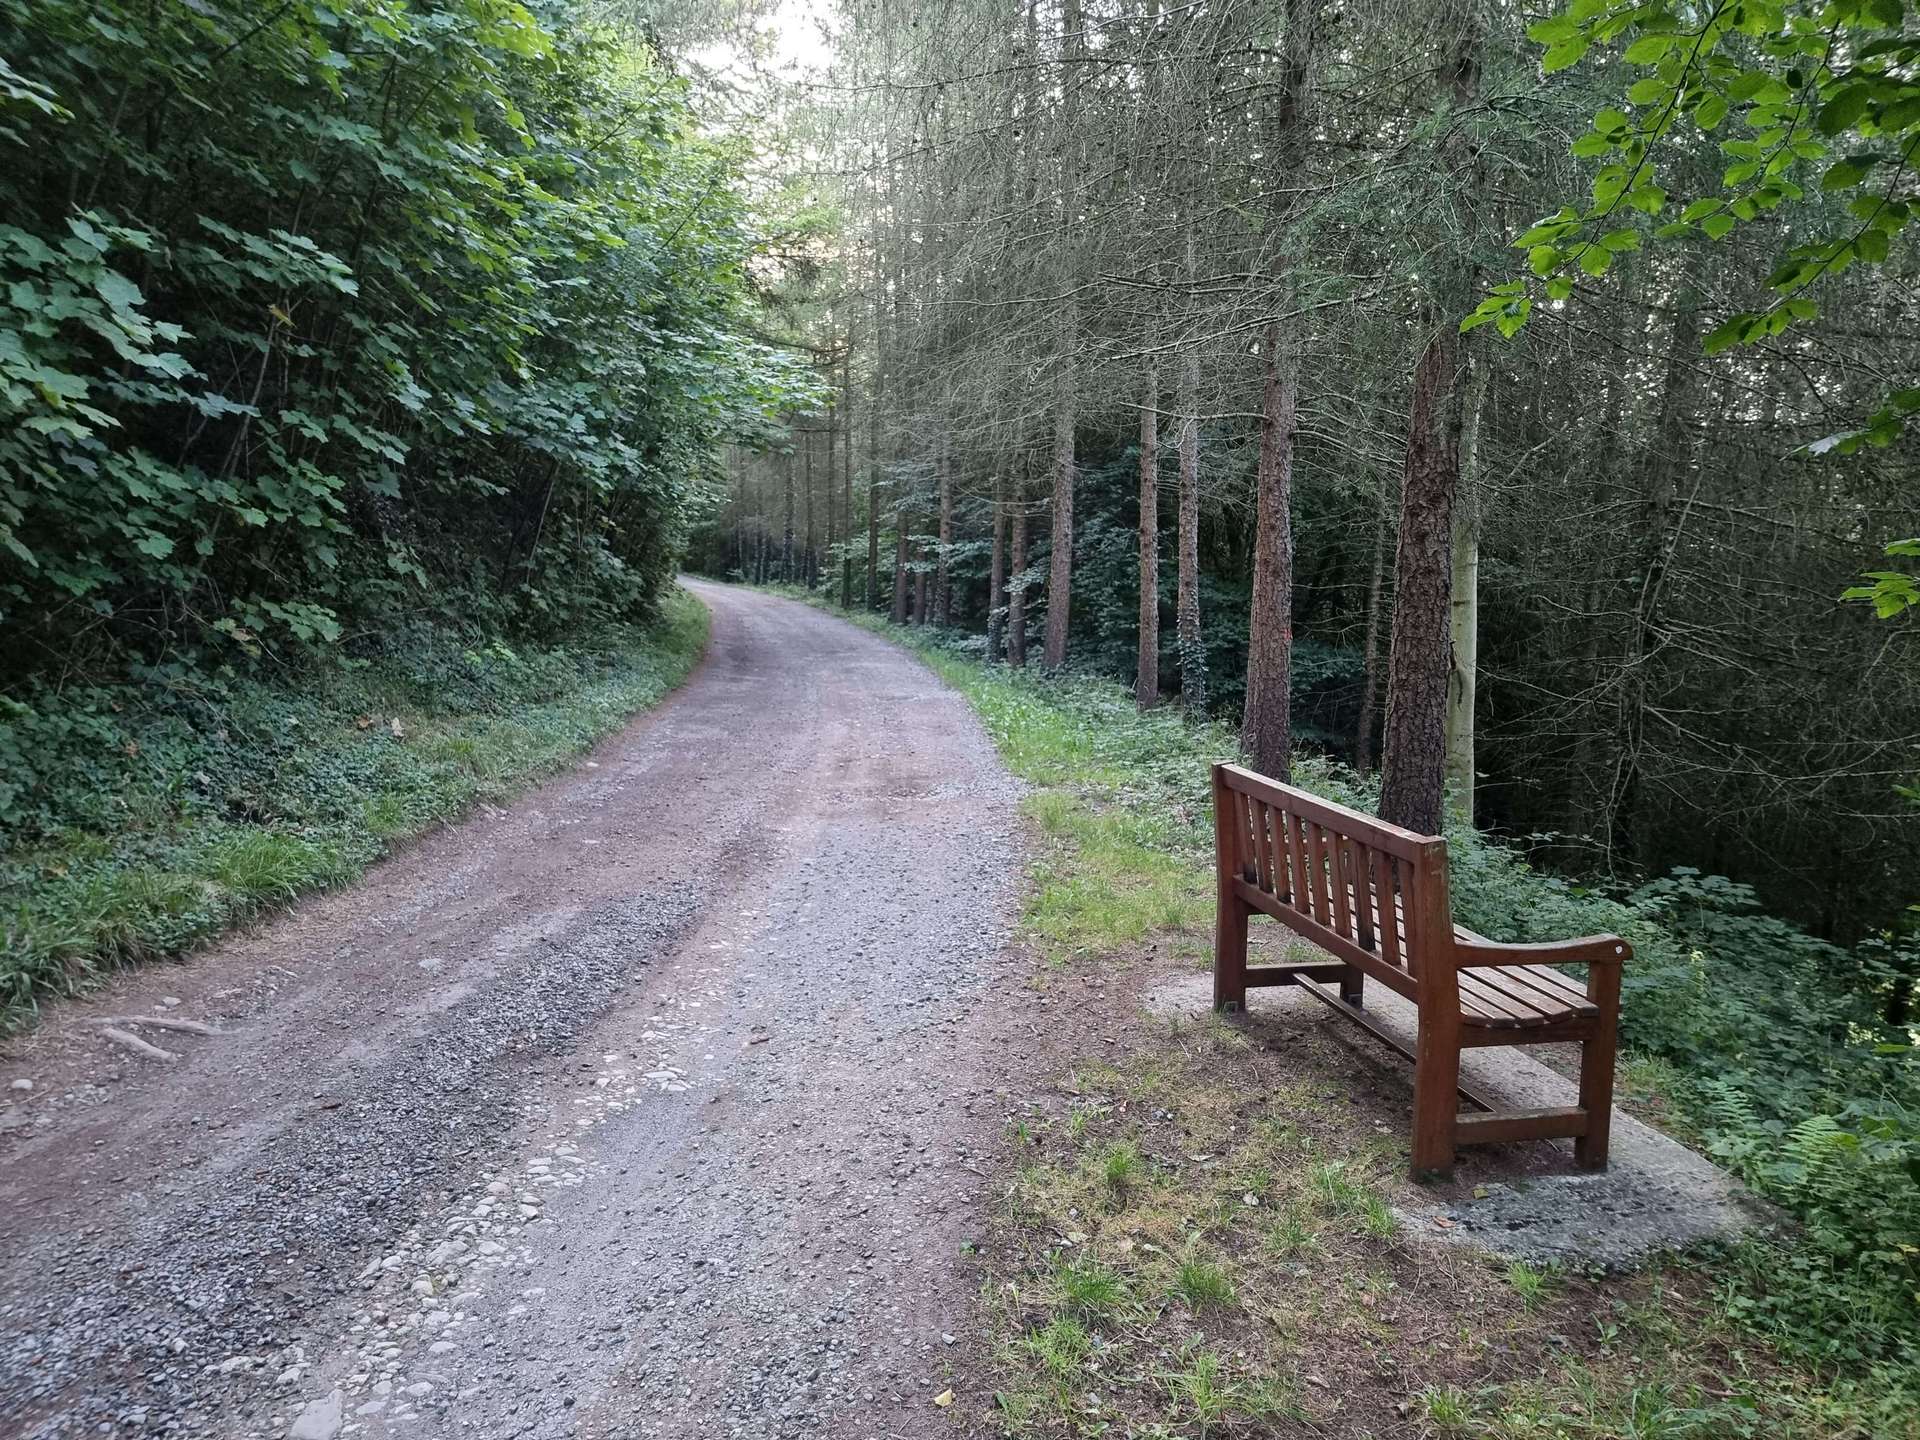 A Solitary Bench